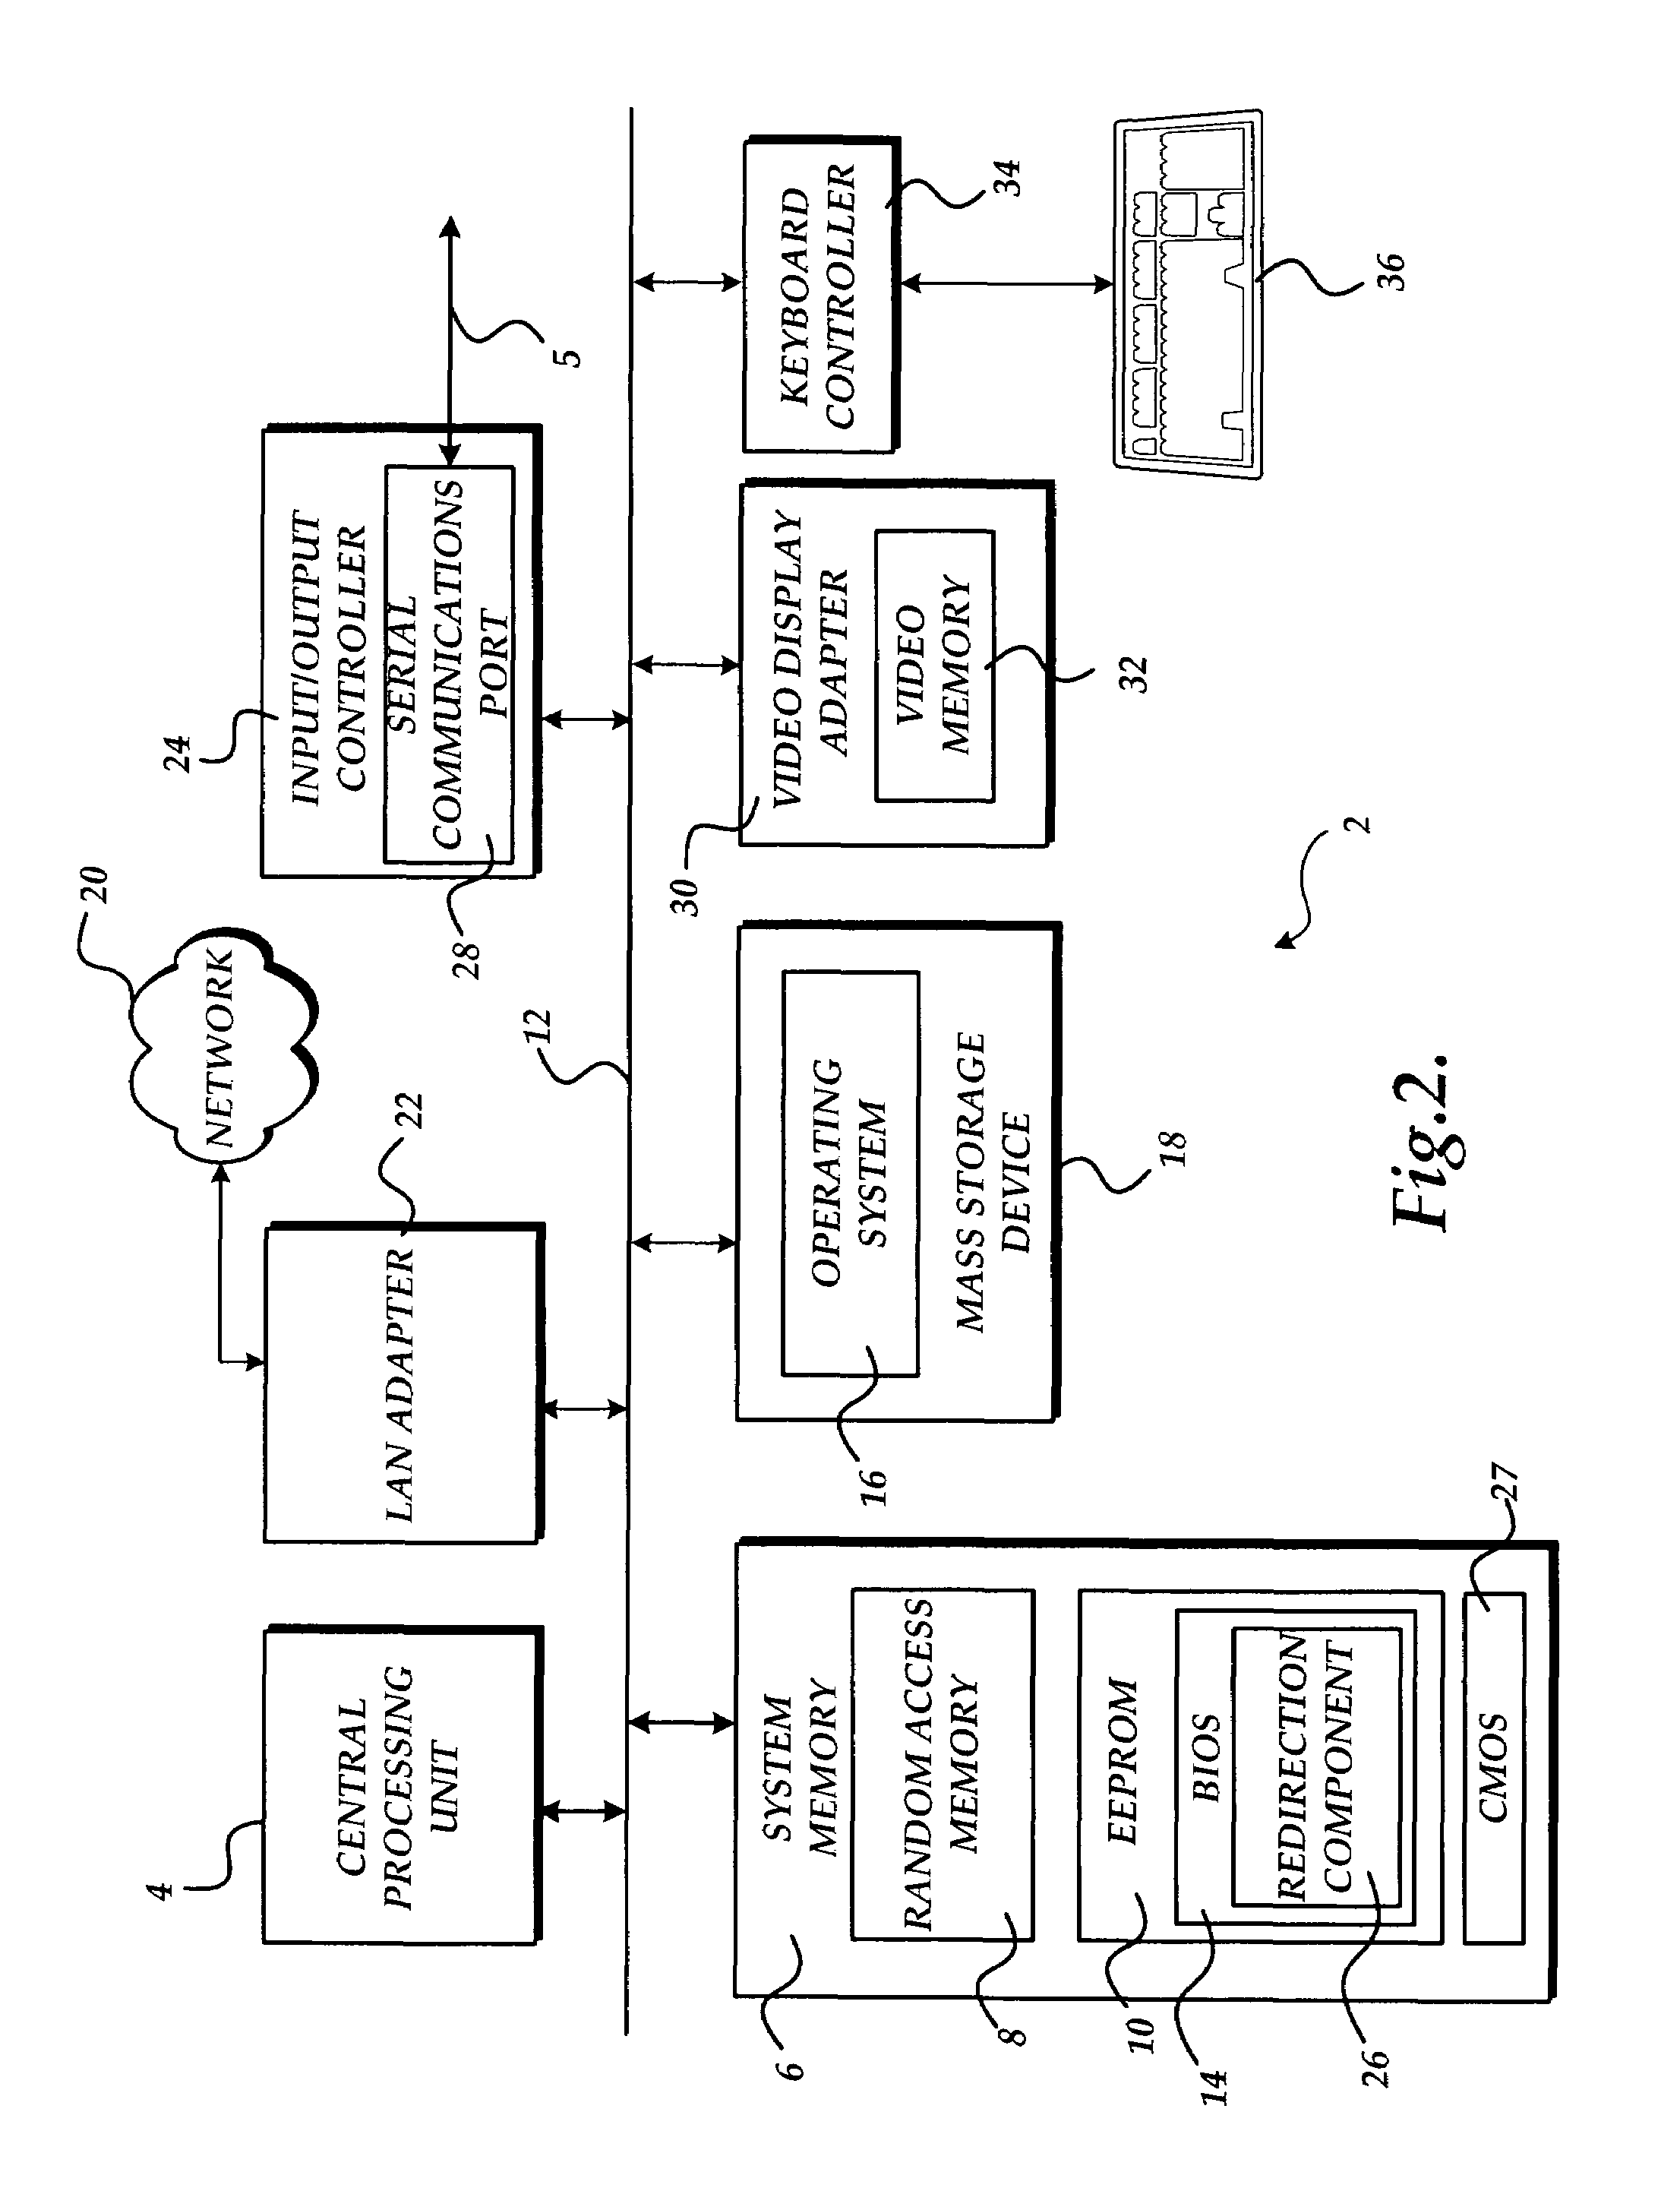 Method, apparatus, and computer-readable medium for ensuring compatibility between an operating system and a BIOS redirection component